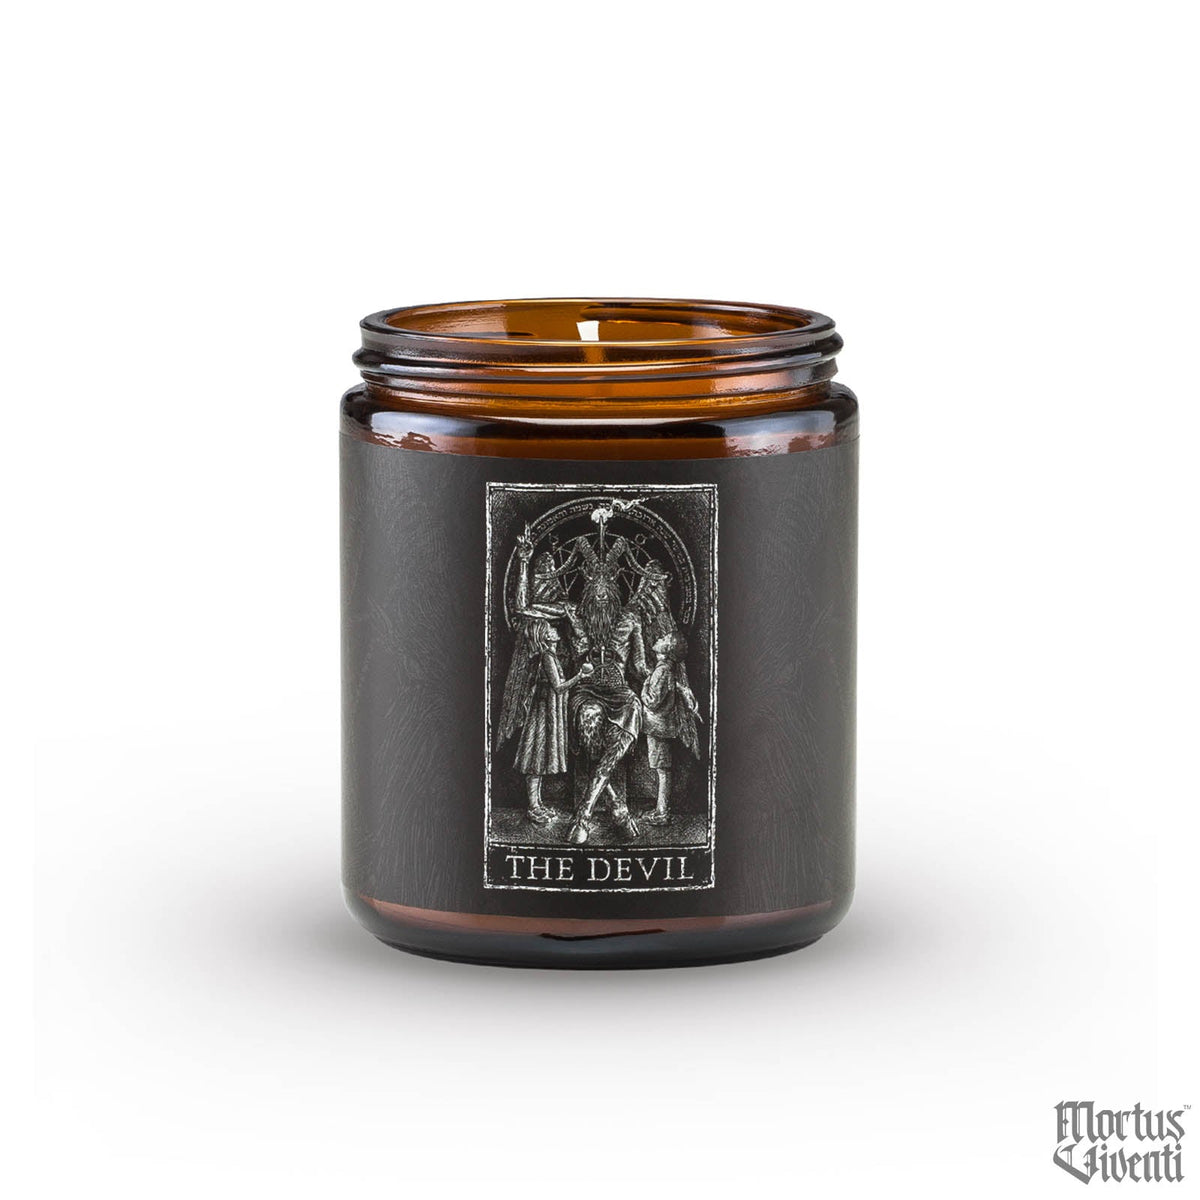 The Devil Tarot Card Soy Candle